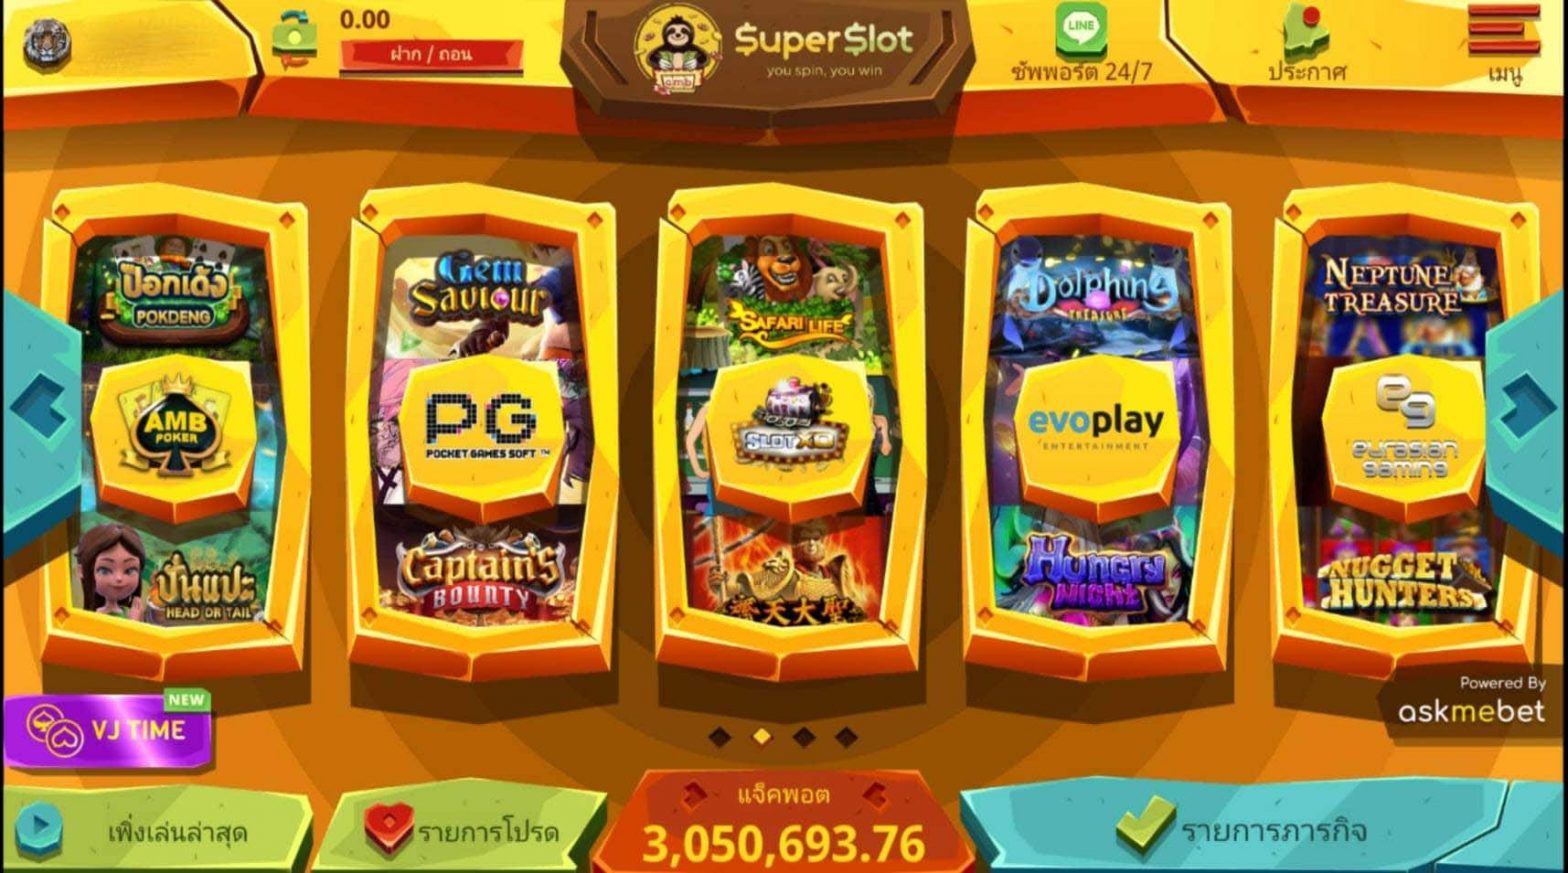 https://play.sexybaccarat.com?action=register&code=ngworldinfo